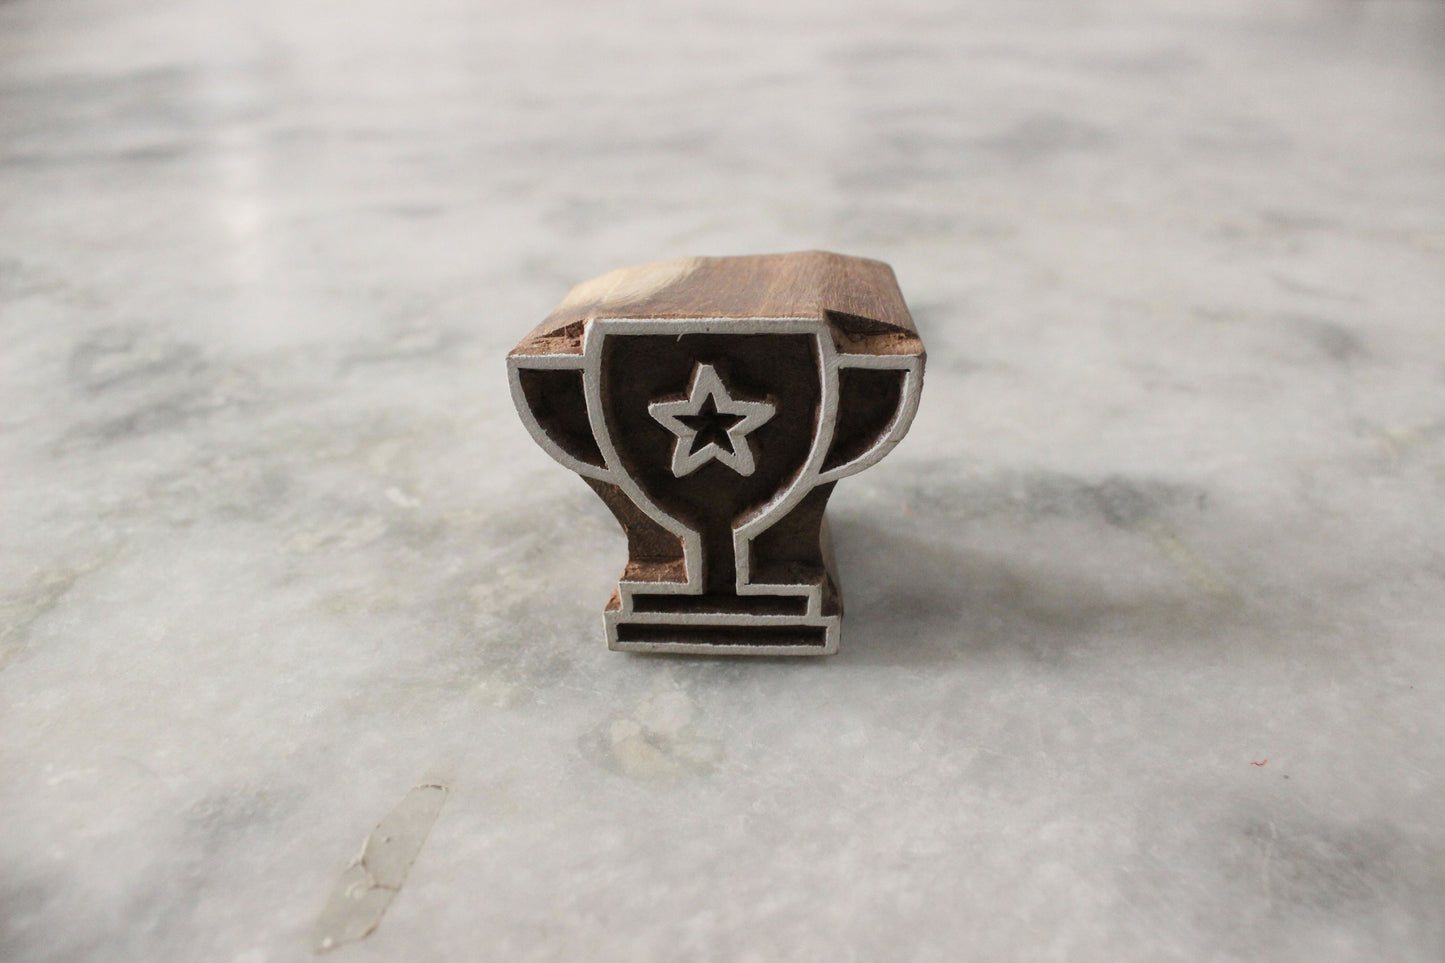 Trophy Block Print Stamp Indian Block Print Stamp Best Block Print Stamp Indian Textile Block For Printing First Soap Making Stamp Traditional Wooden Block